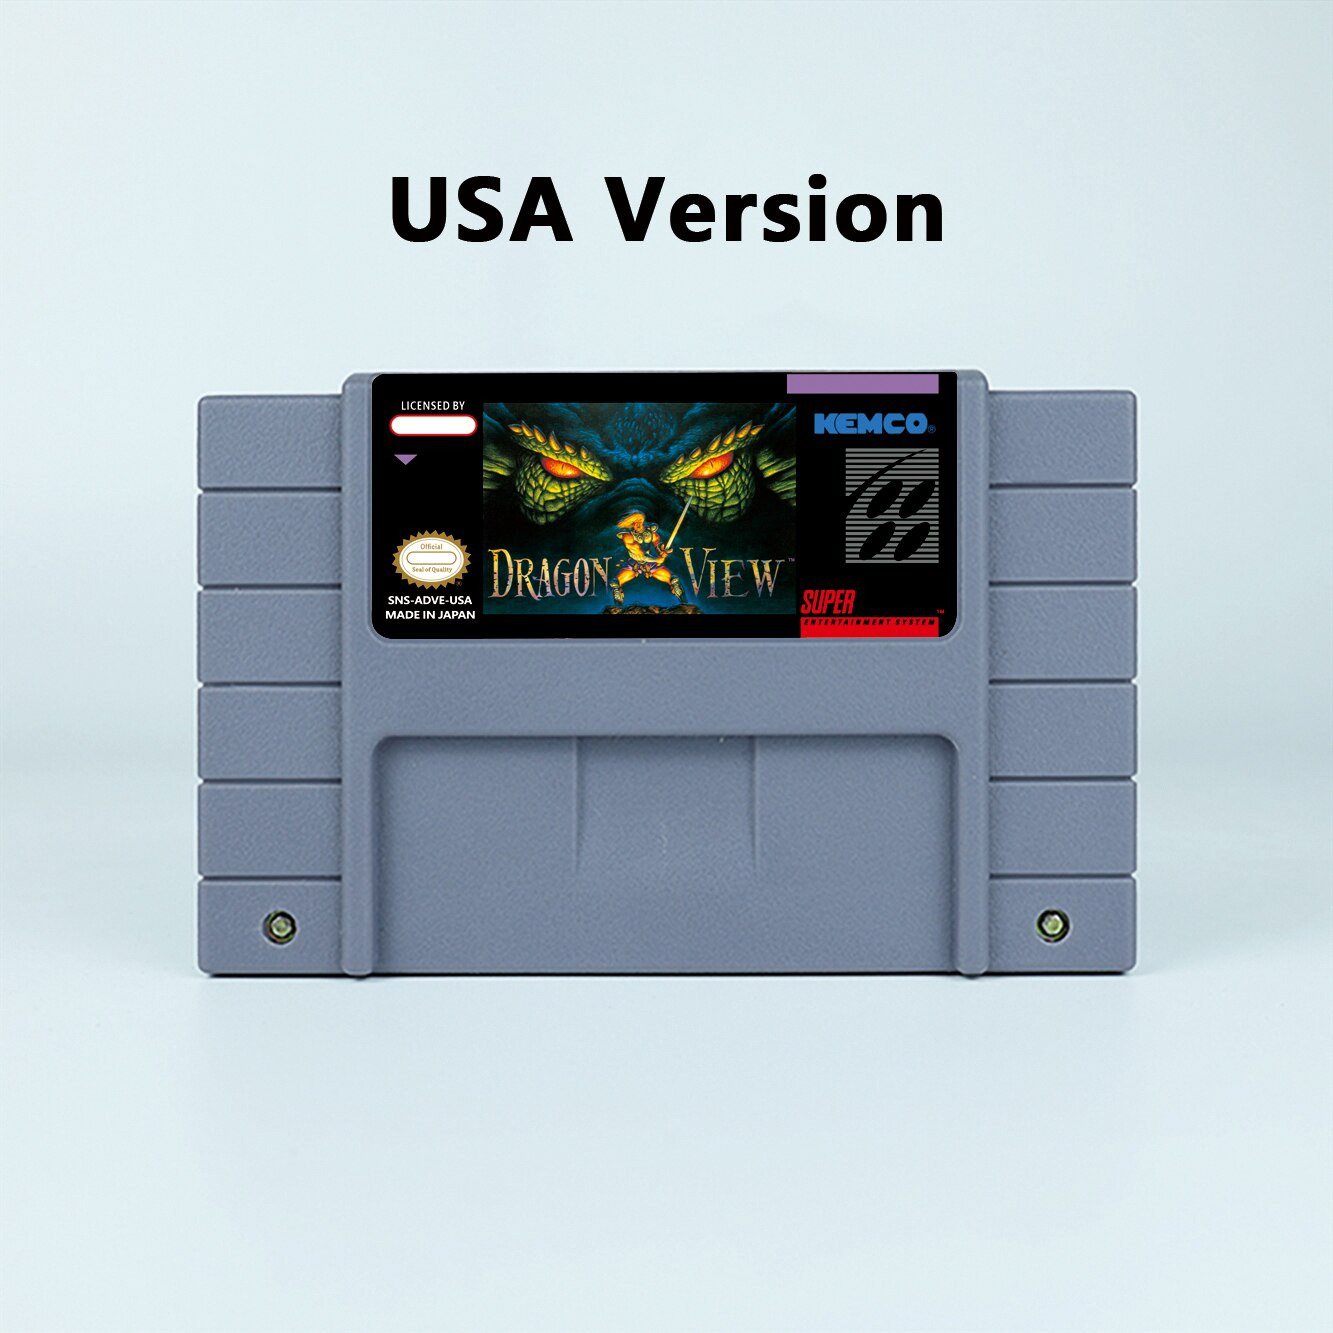 Dragon View Action Game USA Version Cartridge for SNES Game Consoles